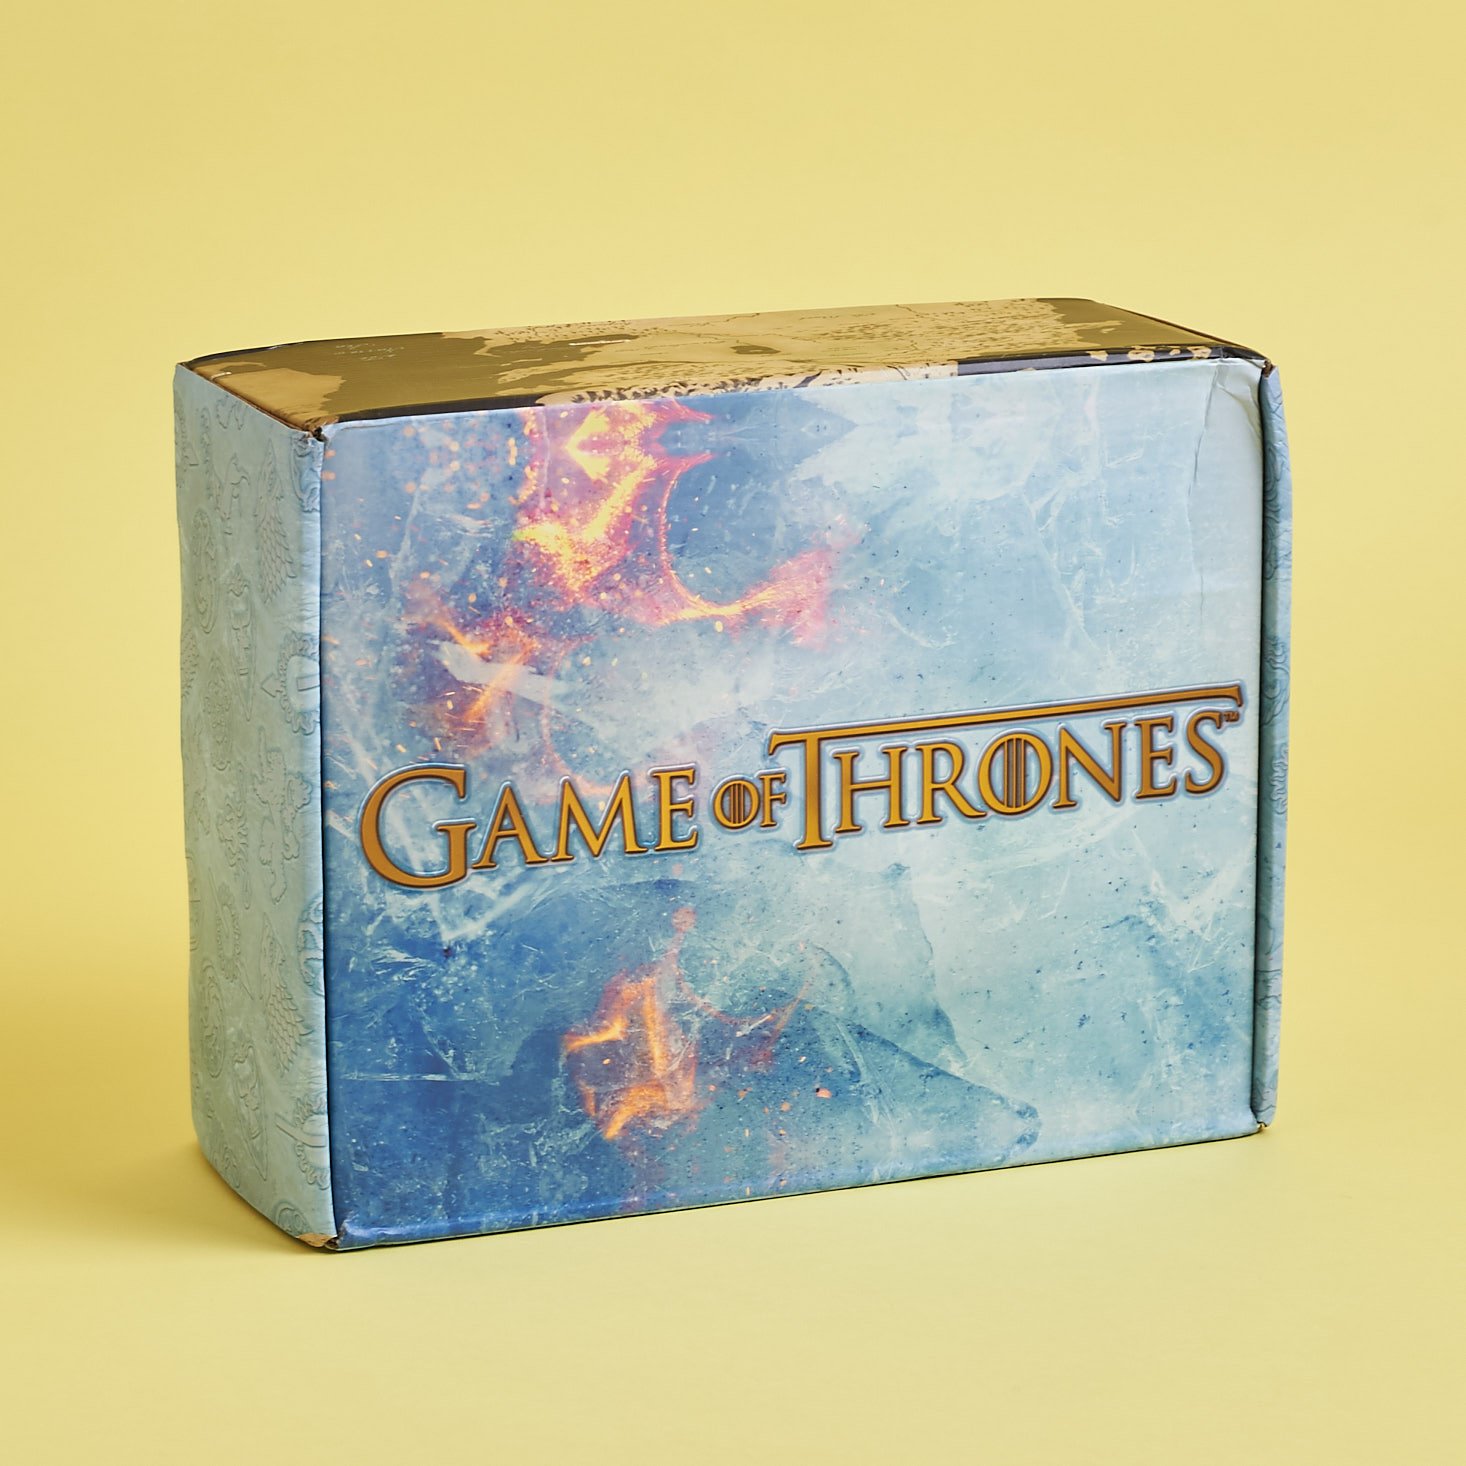 Game of Thrones Box Review: The North and Beyond The Wall – Spring 2018